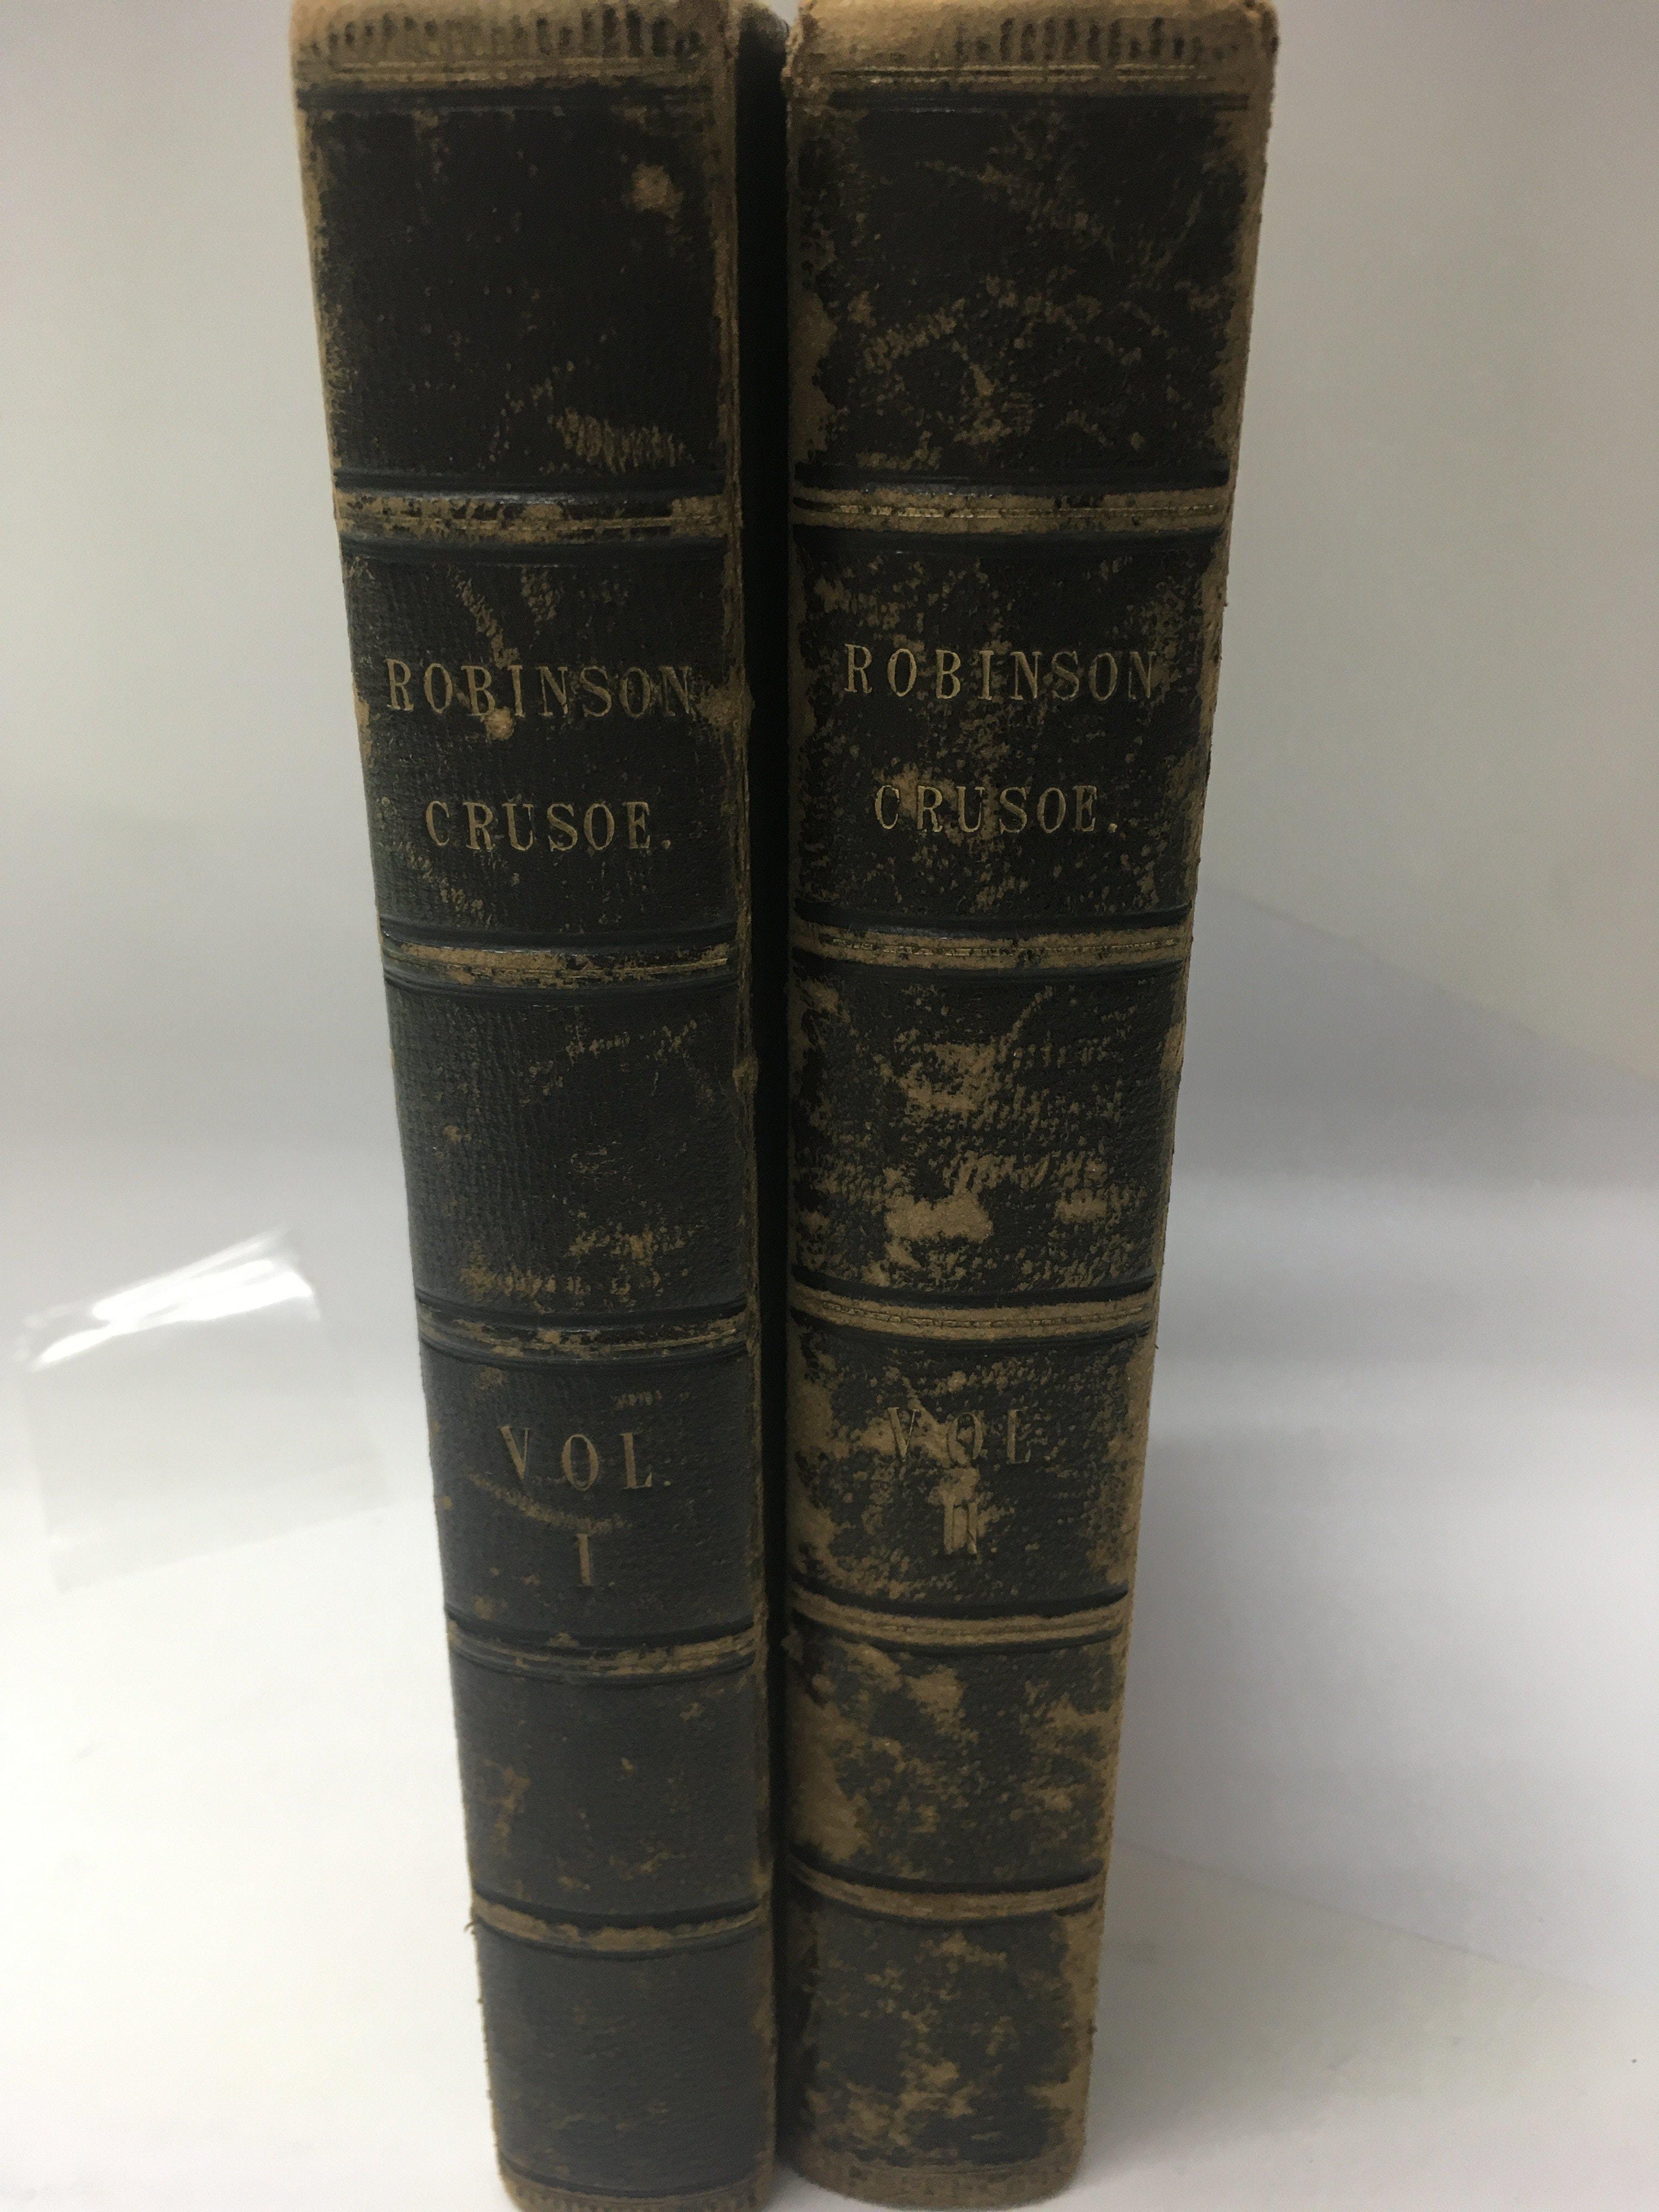 Two volumes Life adventures of Robinson Crusoe dated 1804 .